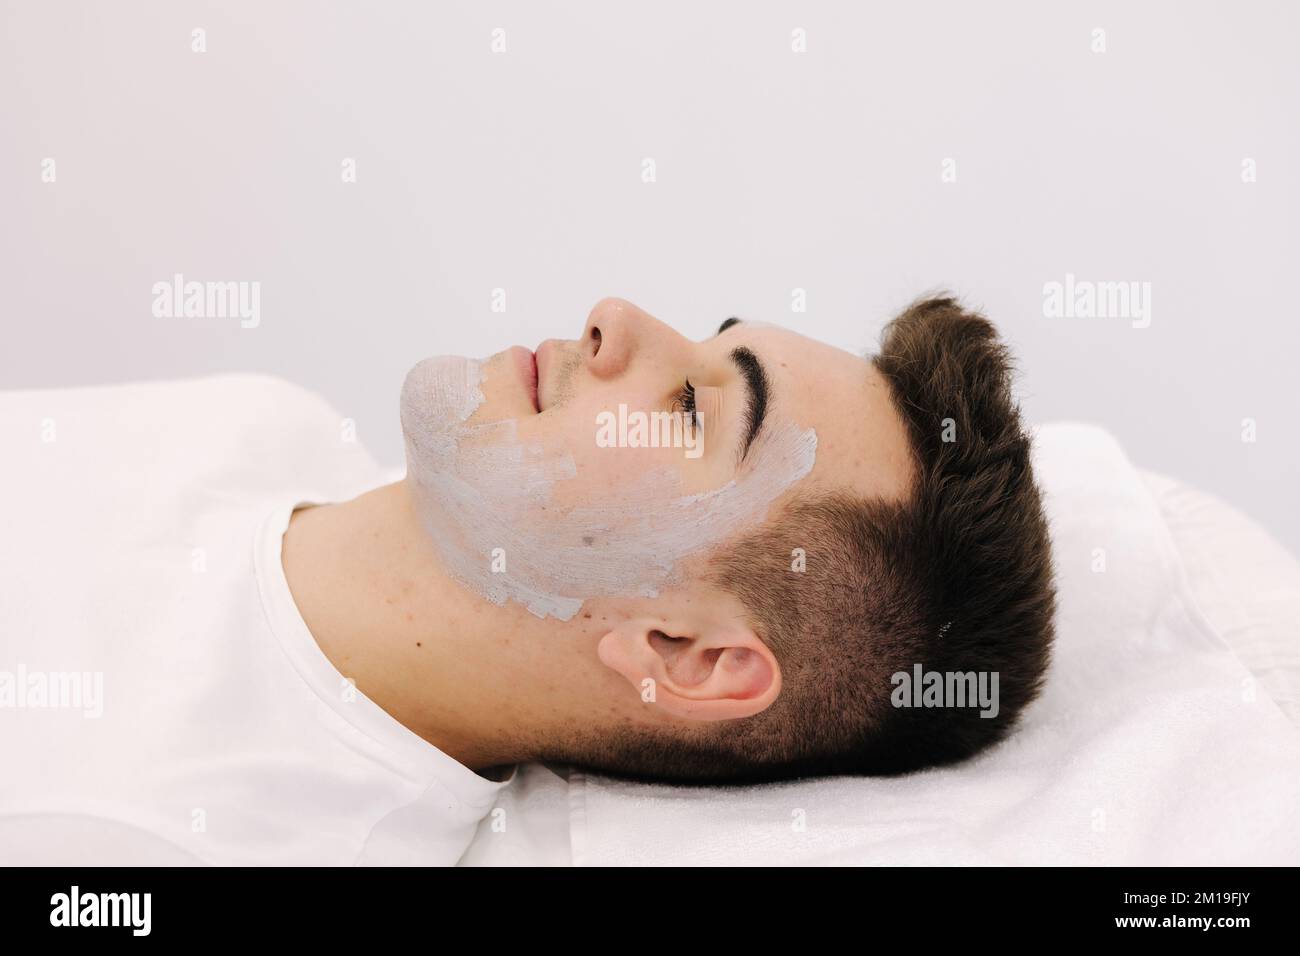 Cosmetologist applying clay mask on man's face in spa salon. Side view of male face during procedure. Stock Photo